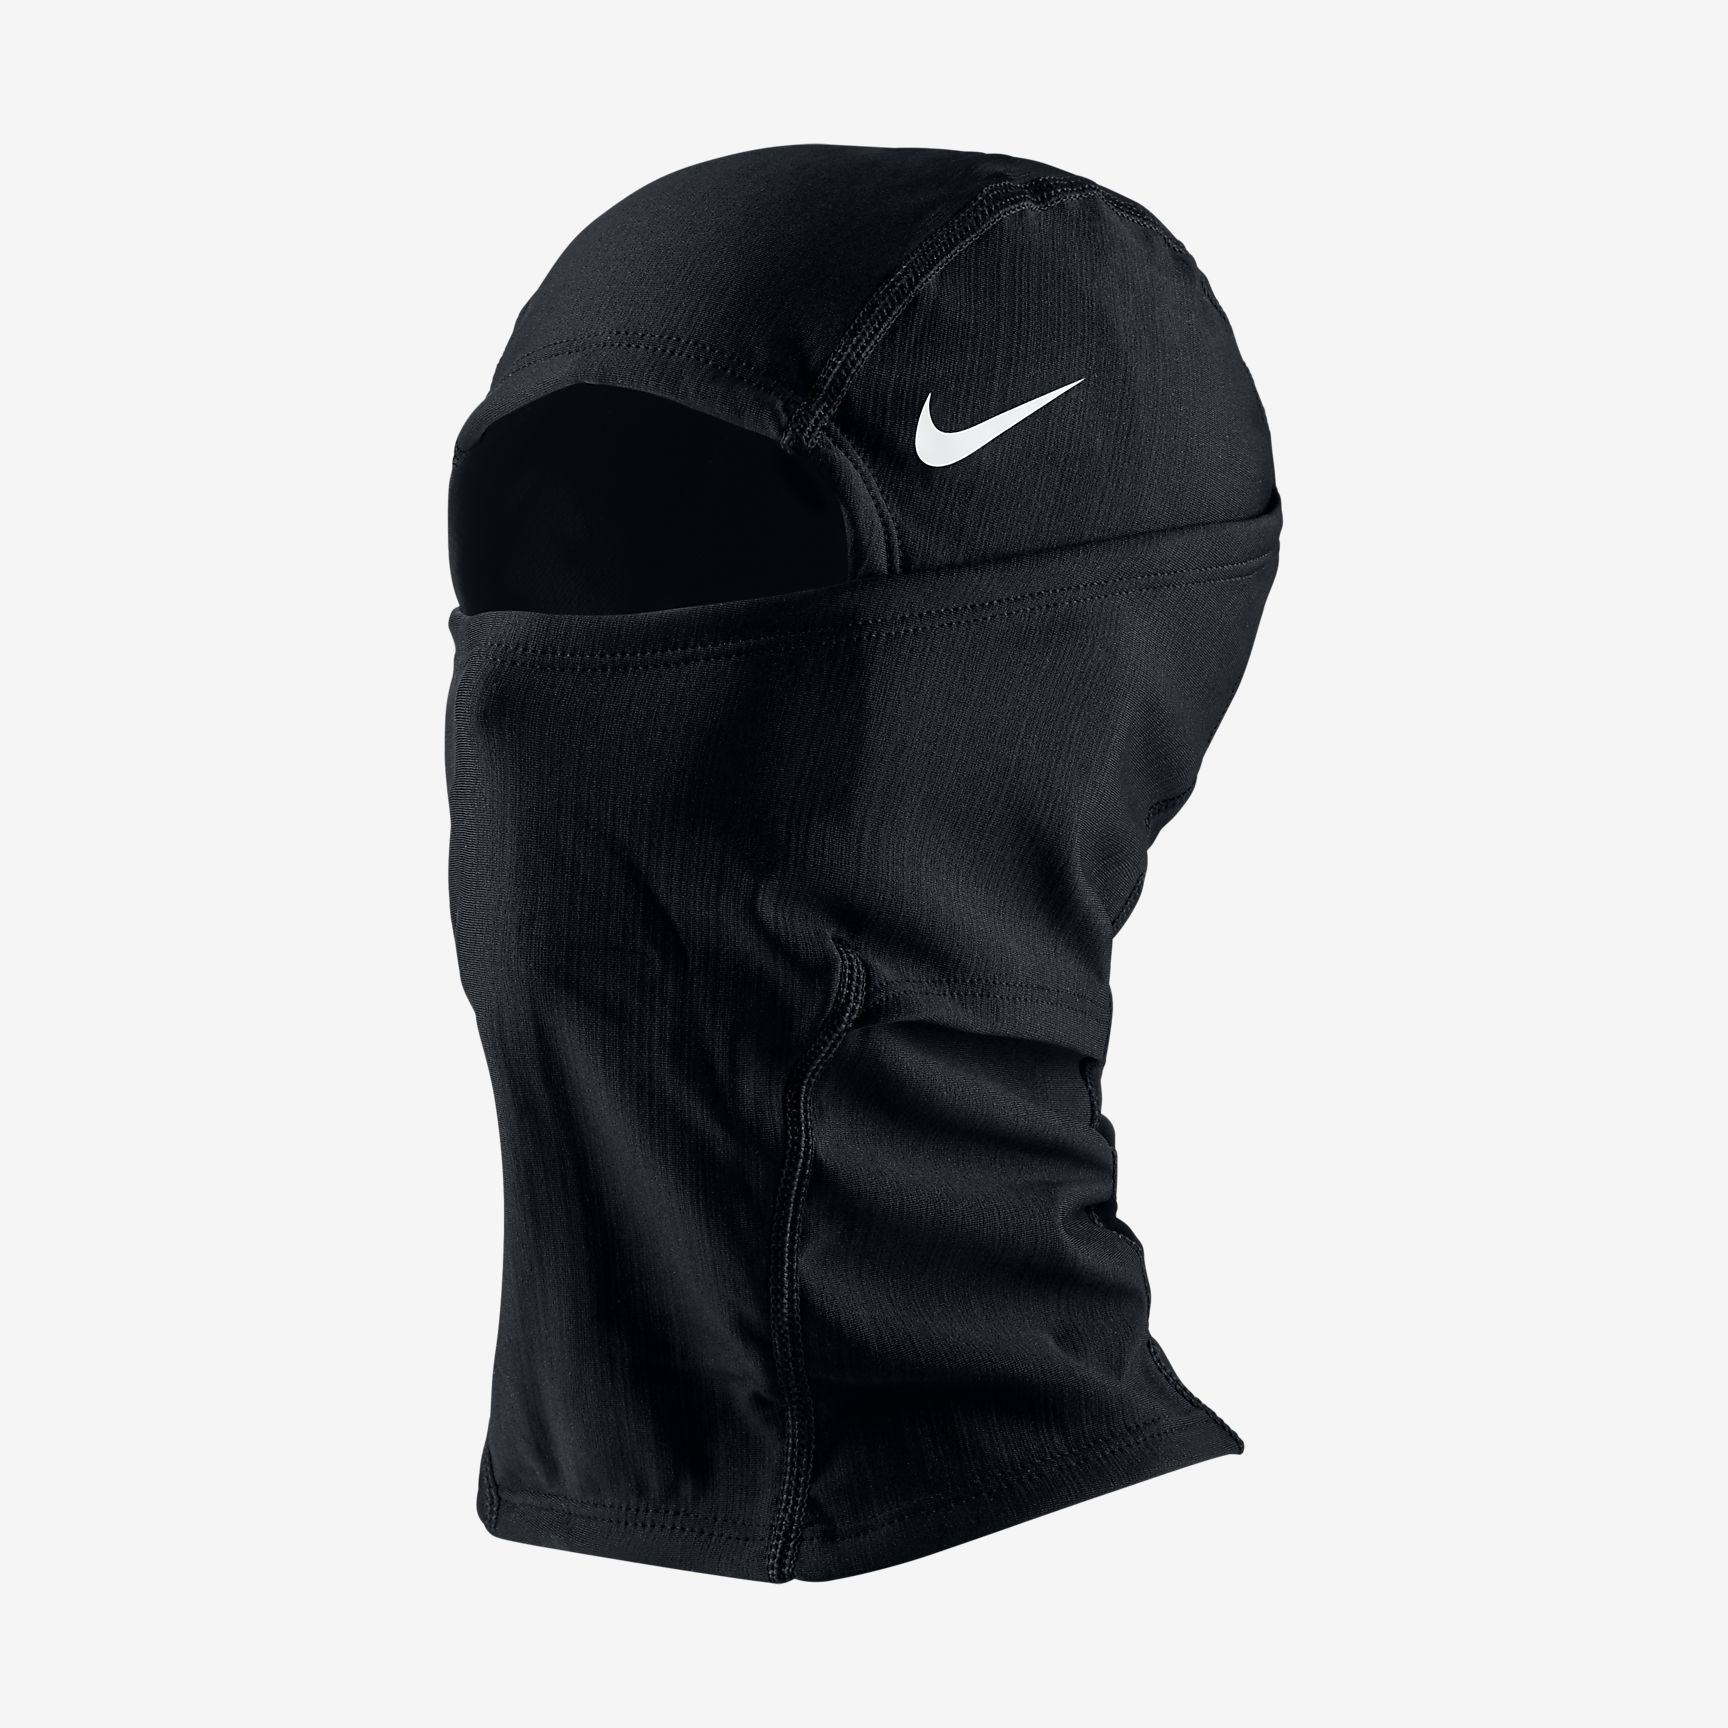 Veraangenamen serie Dom Richard Lawler on Twitter: "Nike still bizarrely doesn't sell face masks  but the Pro Hyperwarm hood is back in stock after being sold out for a  while https://t.co/6gy5pfOpM3 https://t.co/oYcgbObd6V" / Twitter